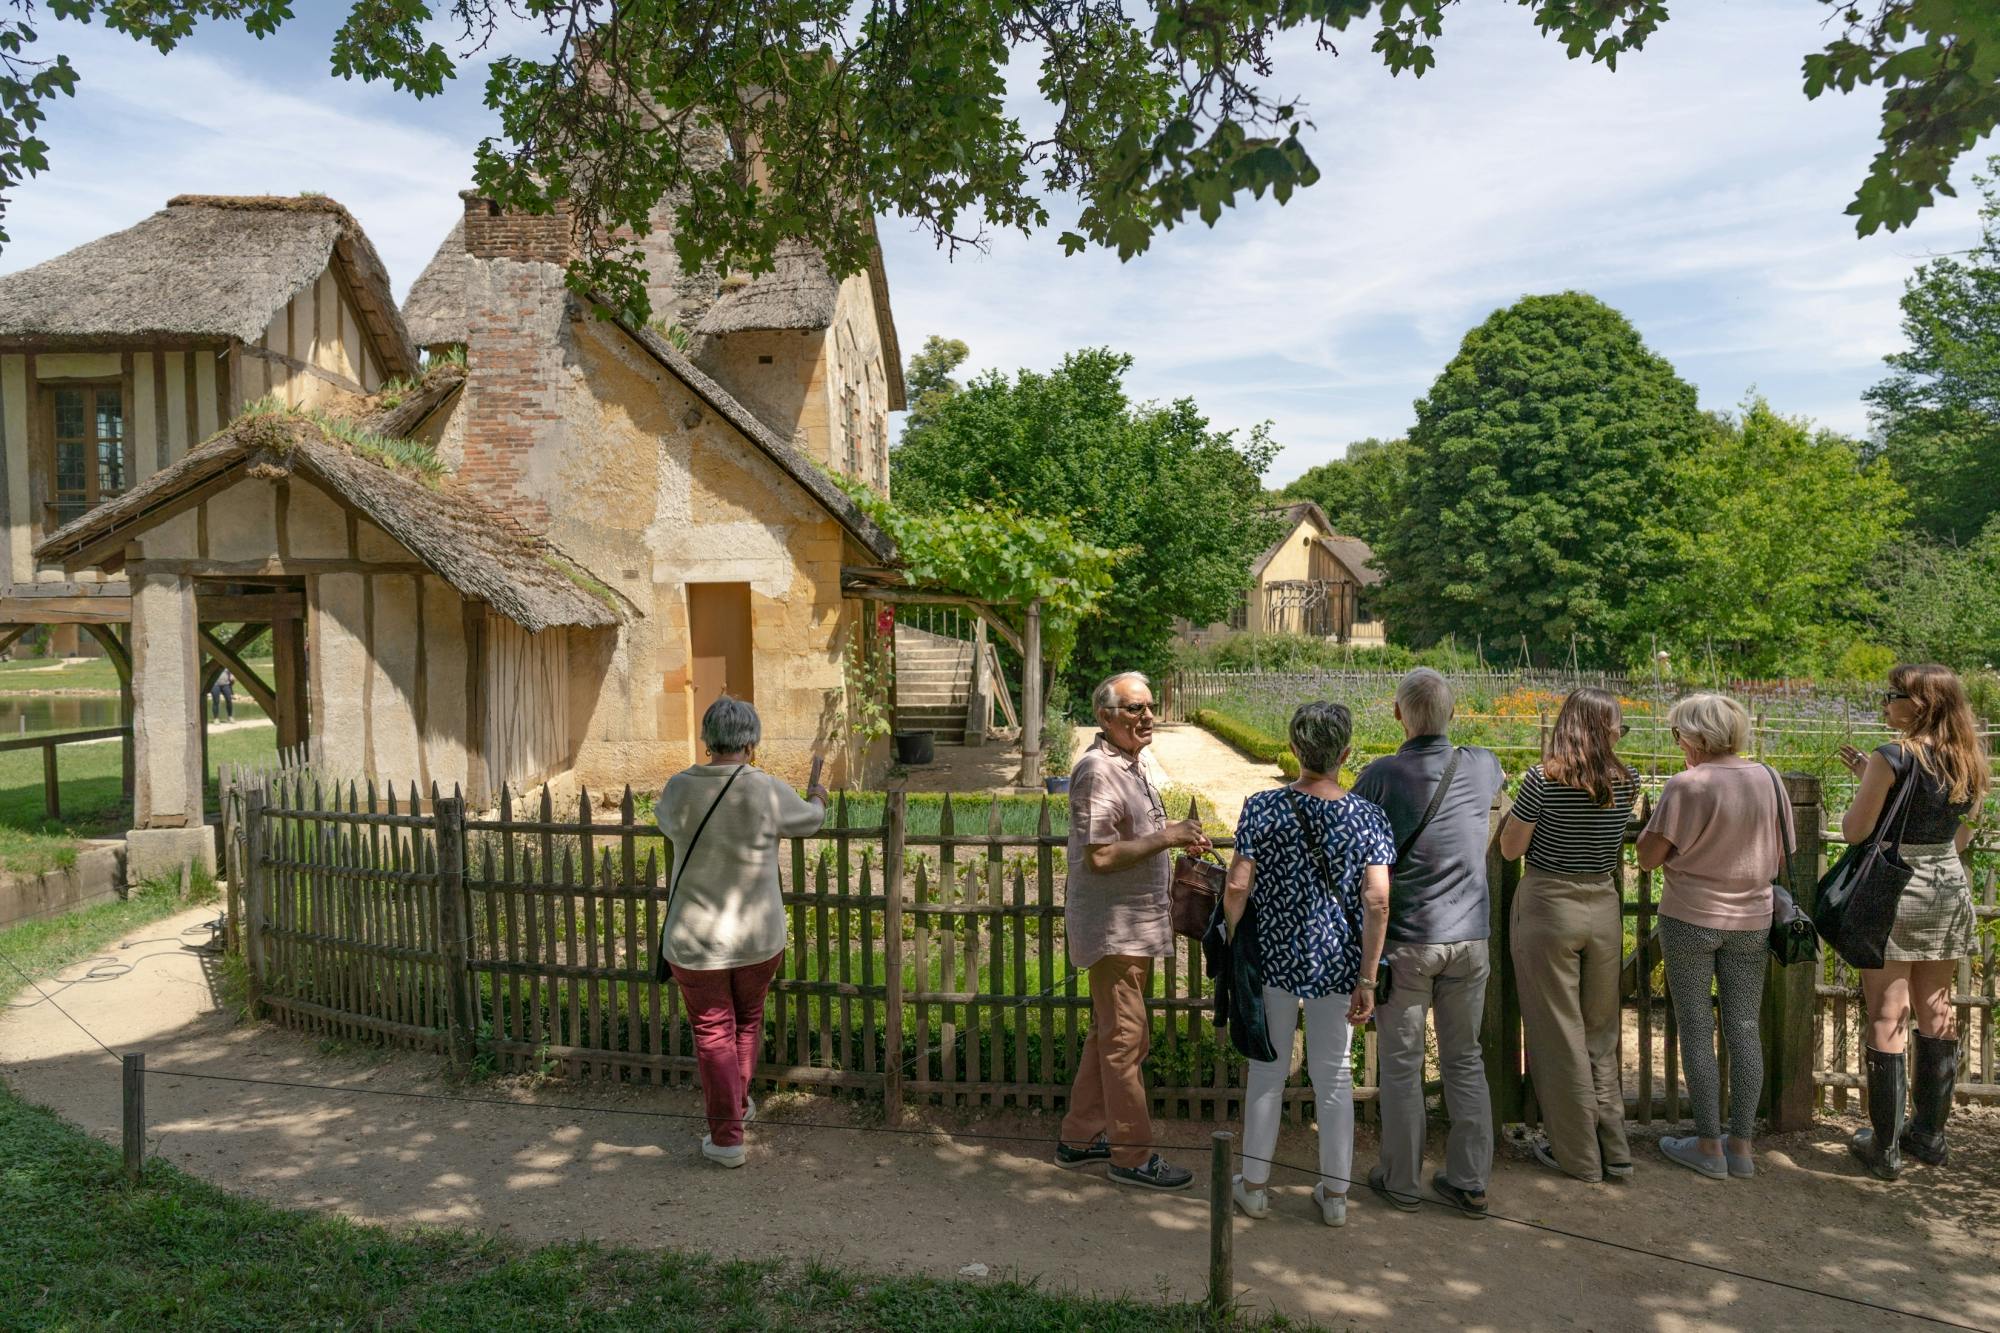 An afternoon in the private estate of Marie Antoinette – the Petit Trianon and hamlet Musement